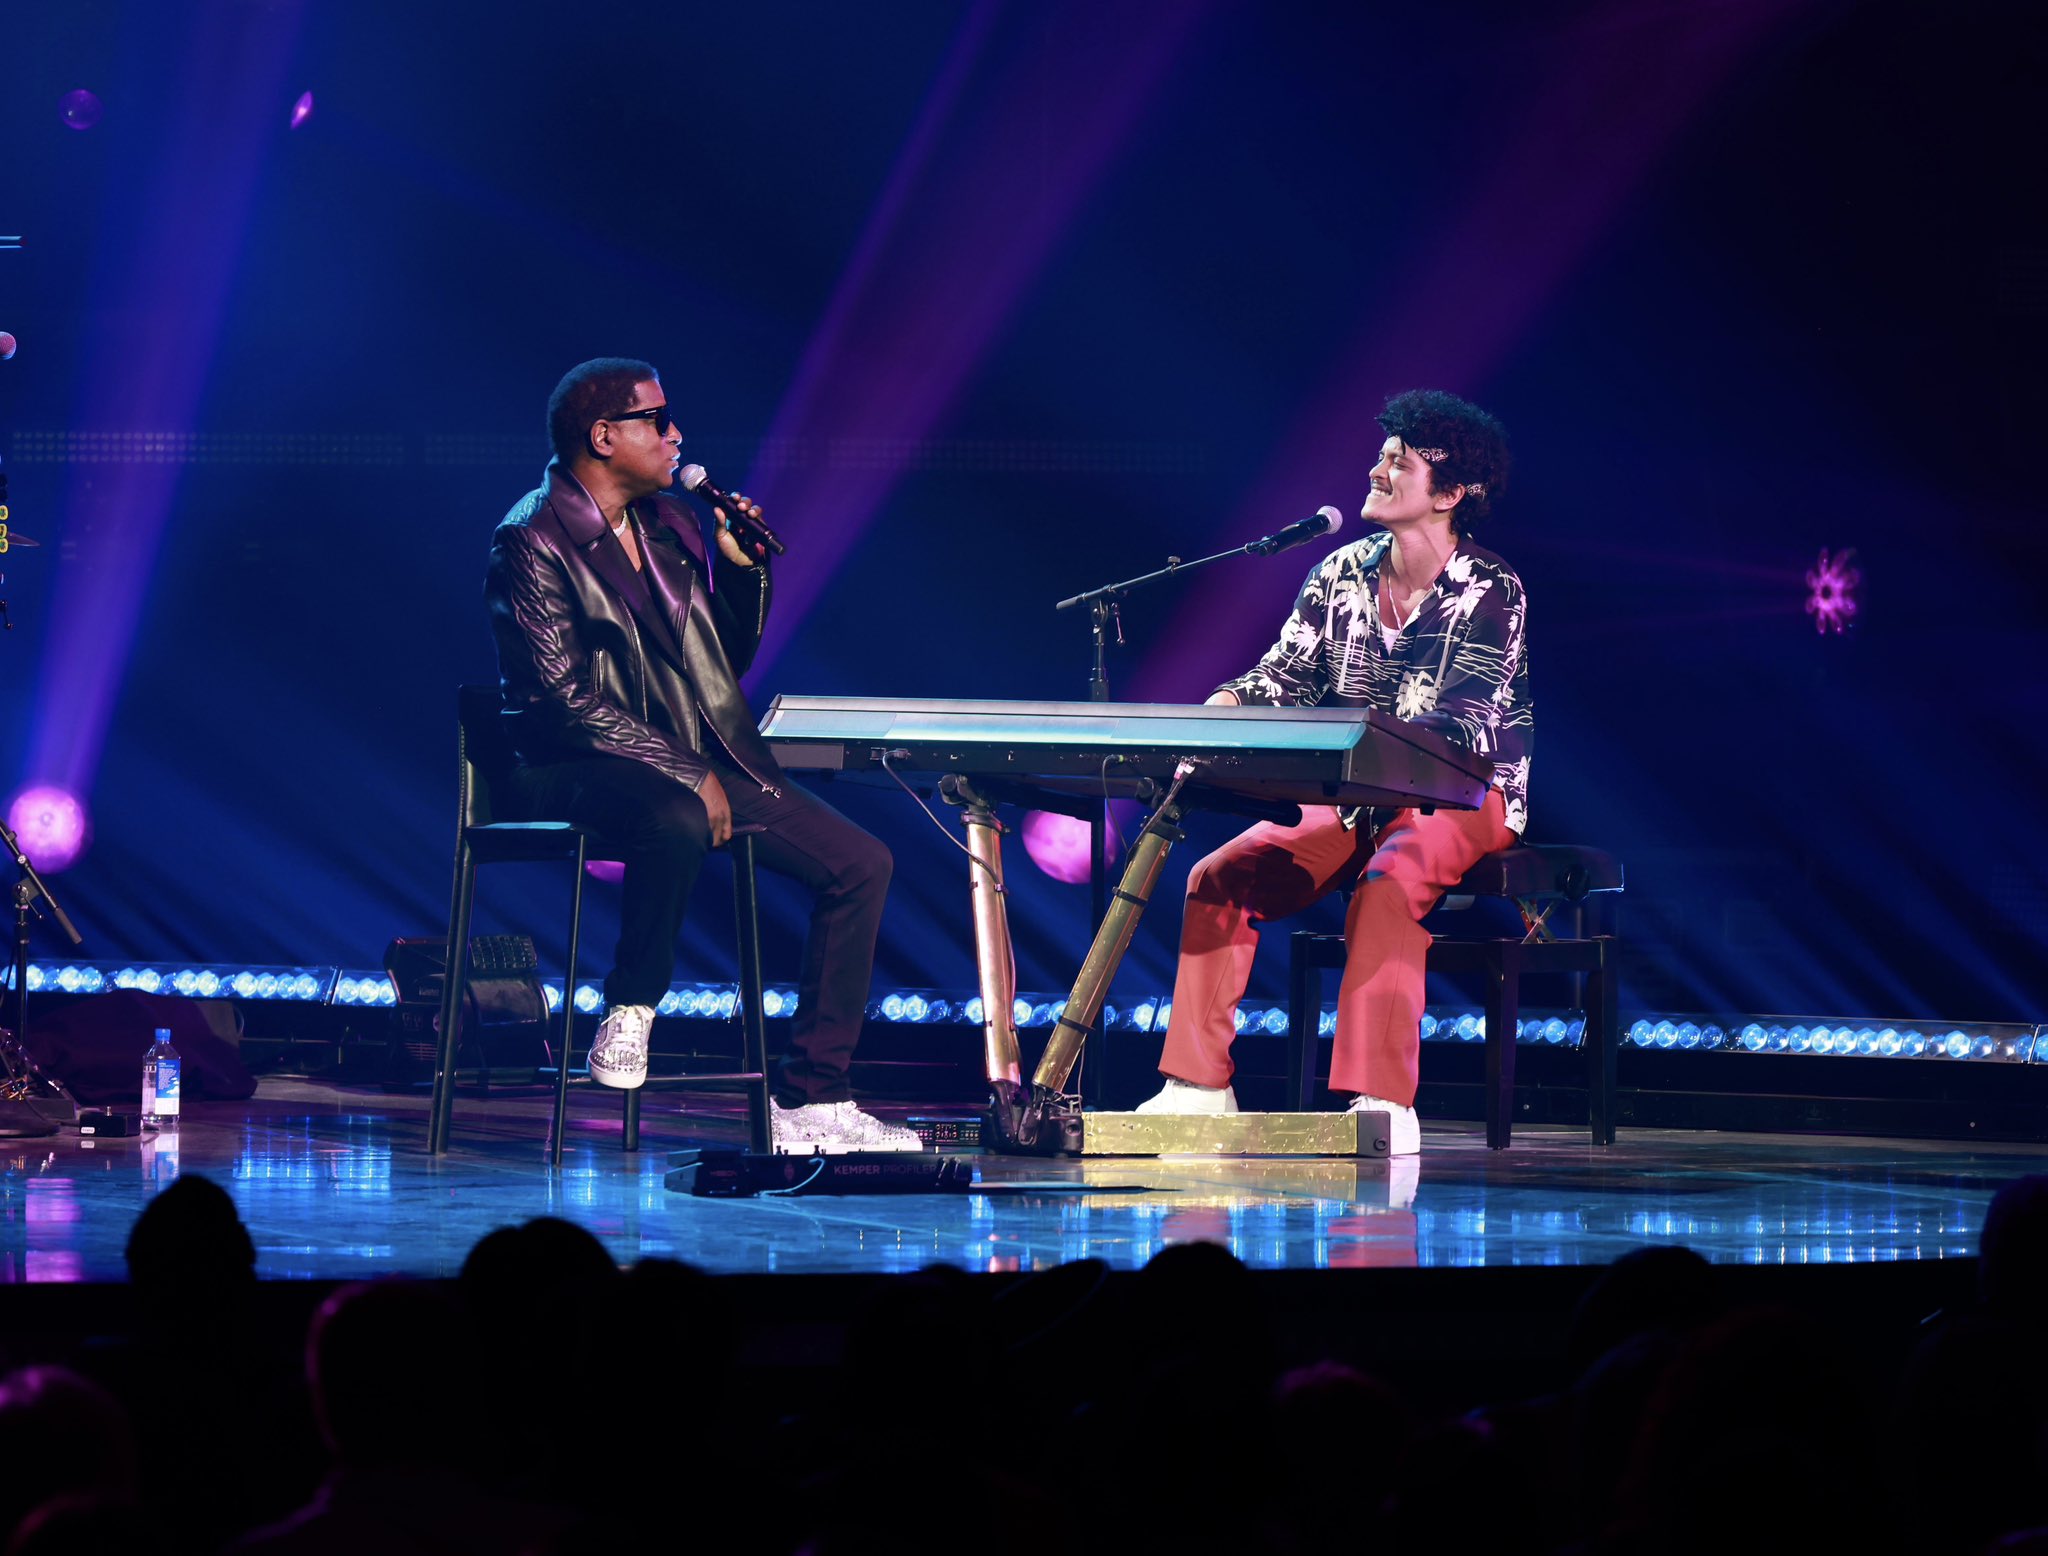 Bruno Mars Blazes the Stage with His Idol Babyface at Las Vegas Residency